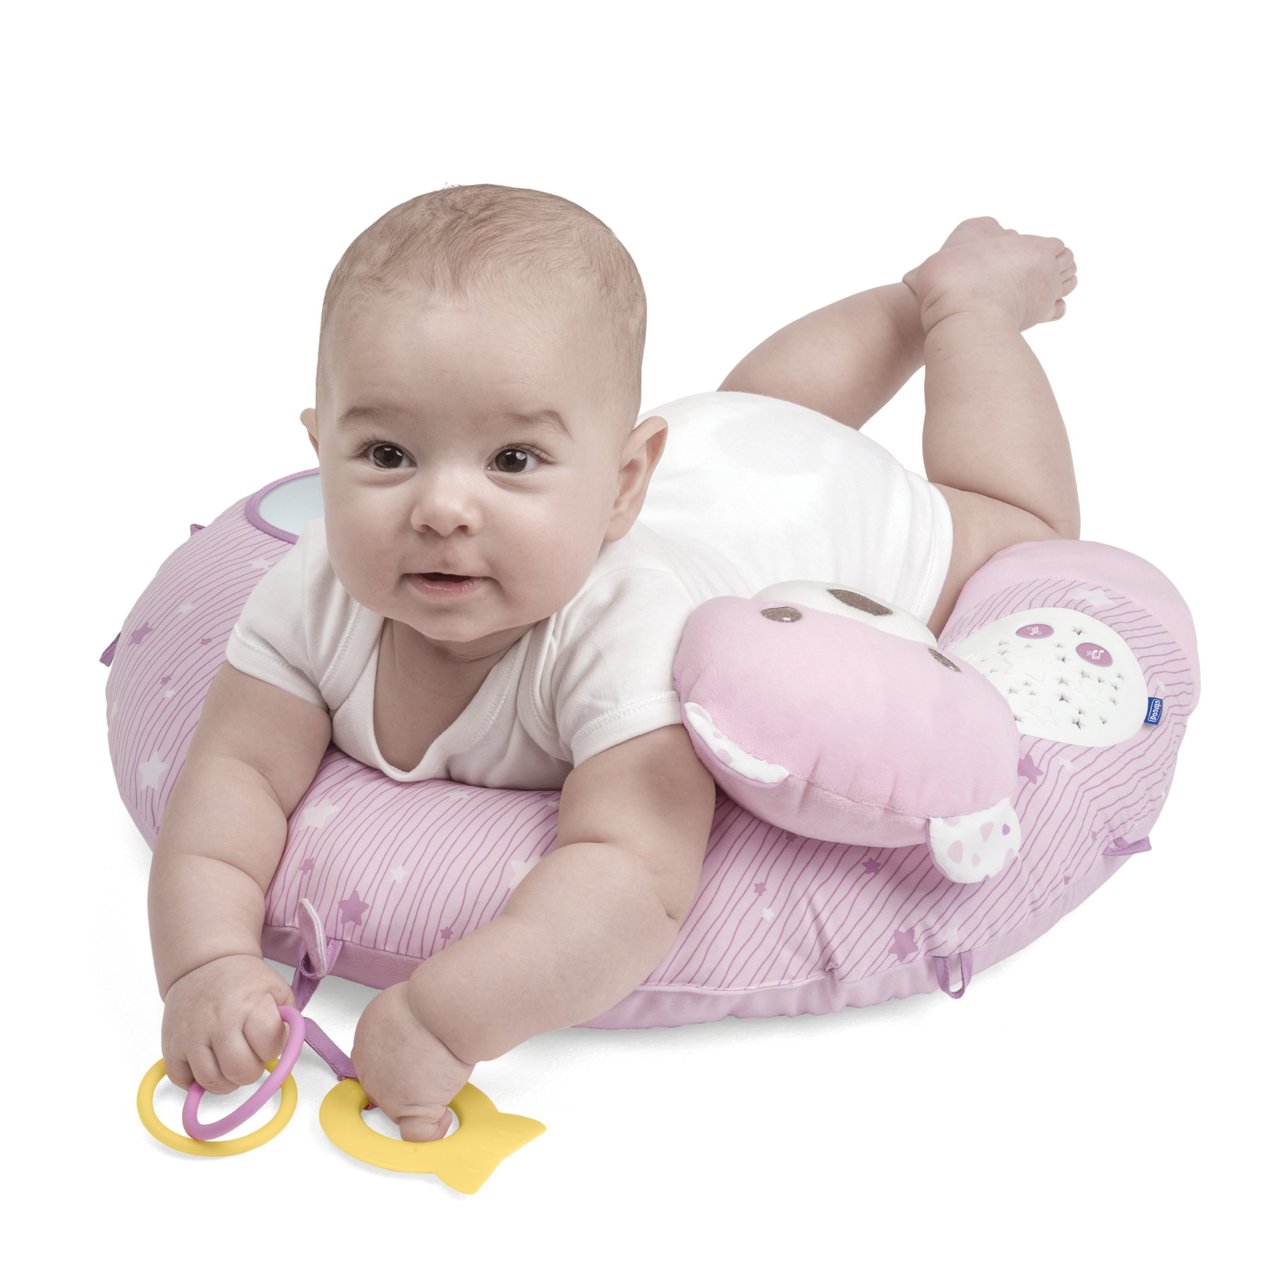 Chicco Nidito Para Bebes My First Nest 3 En 1 Rosa